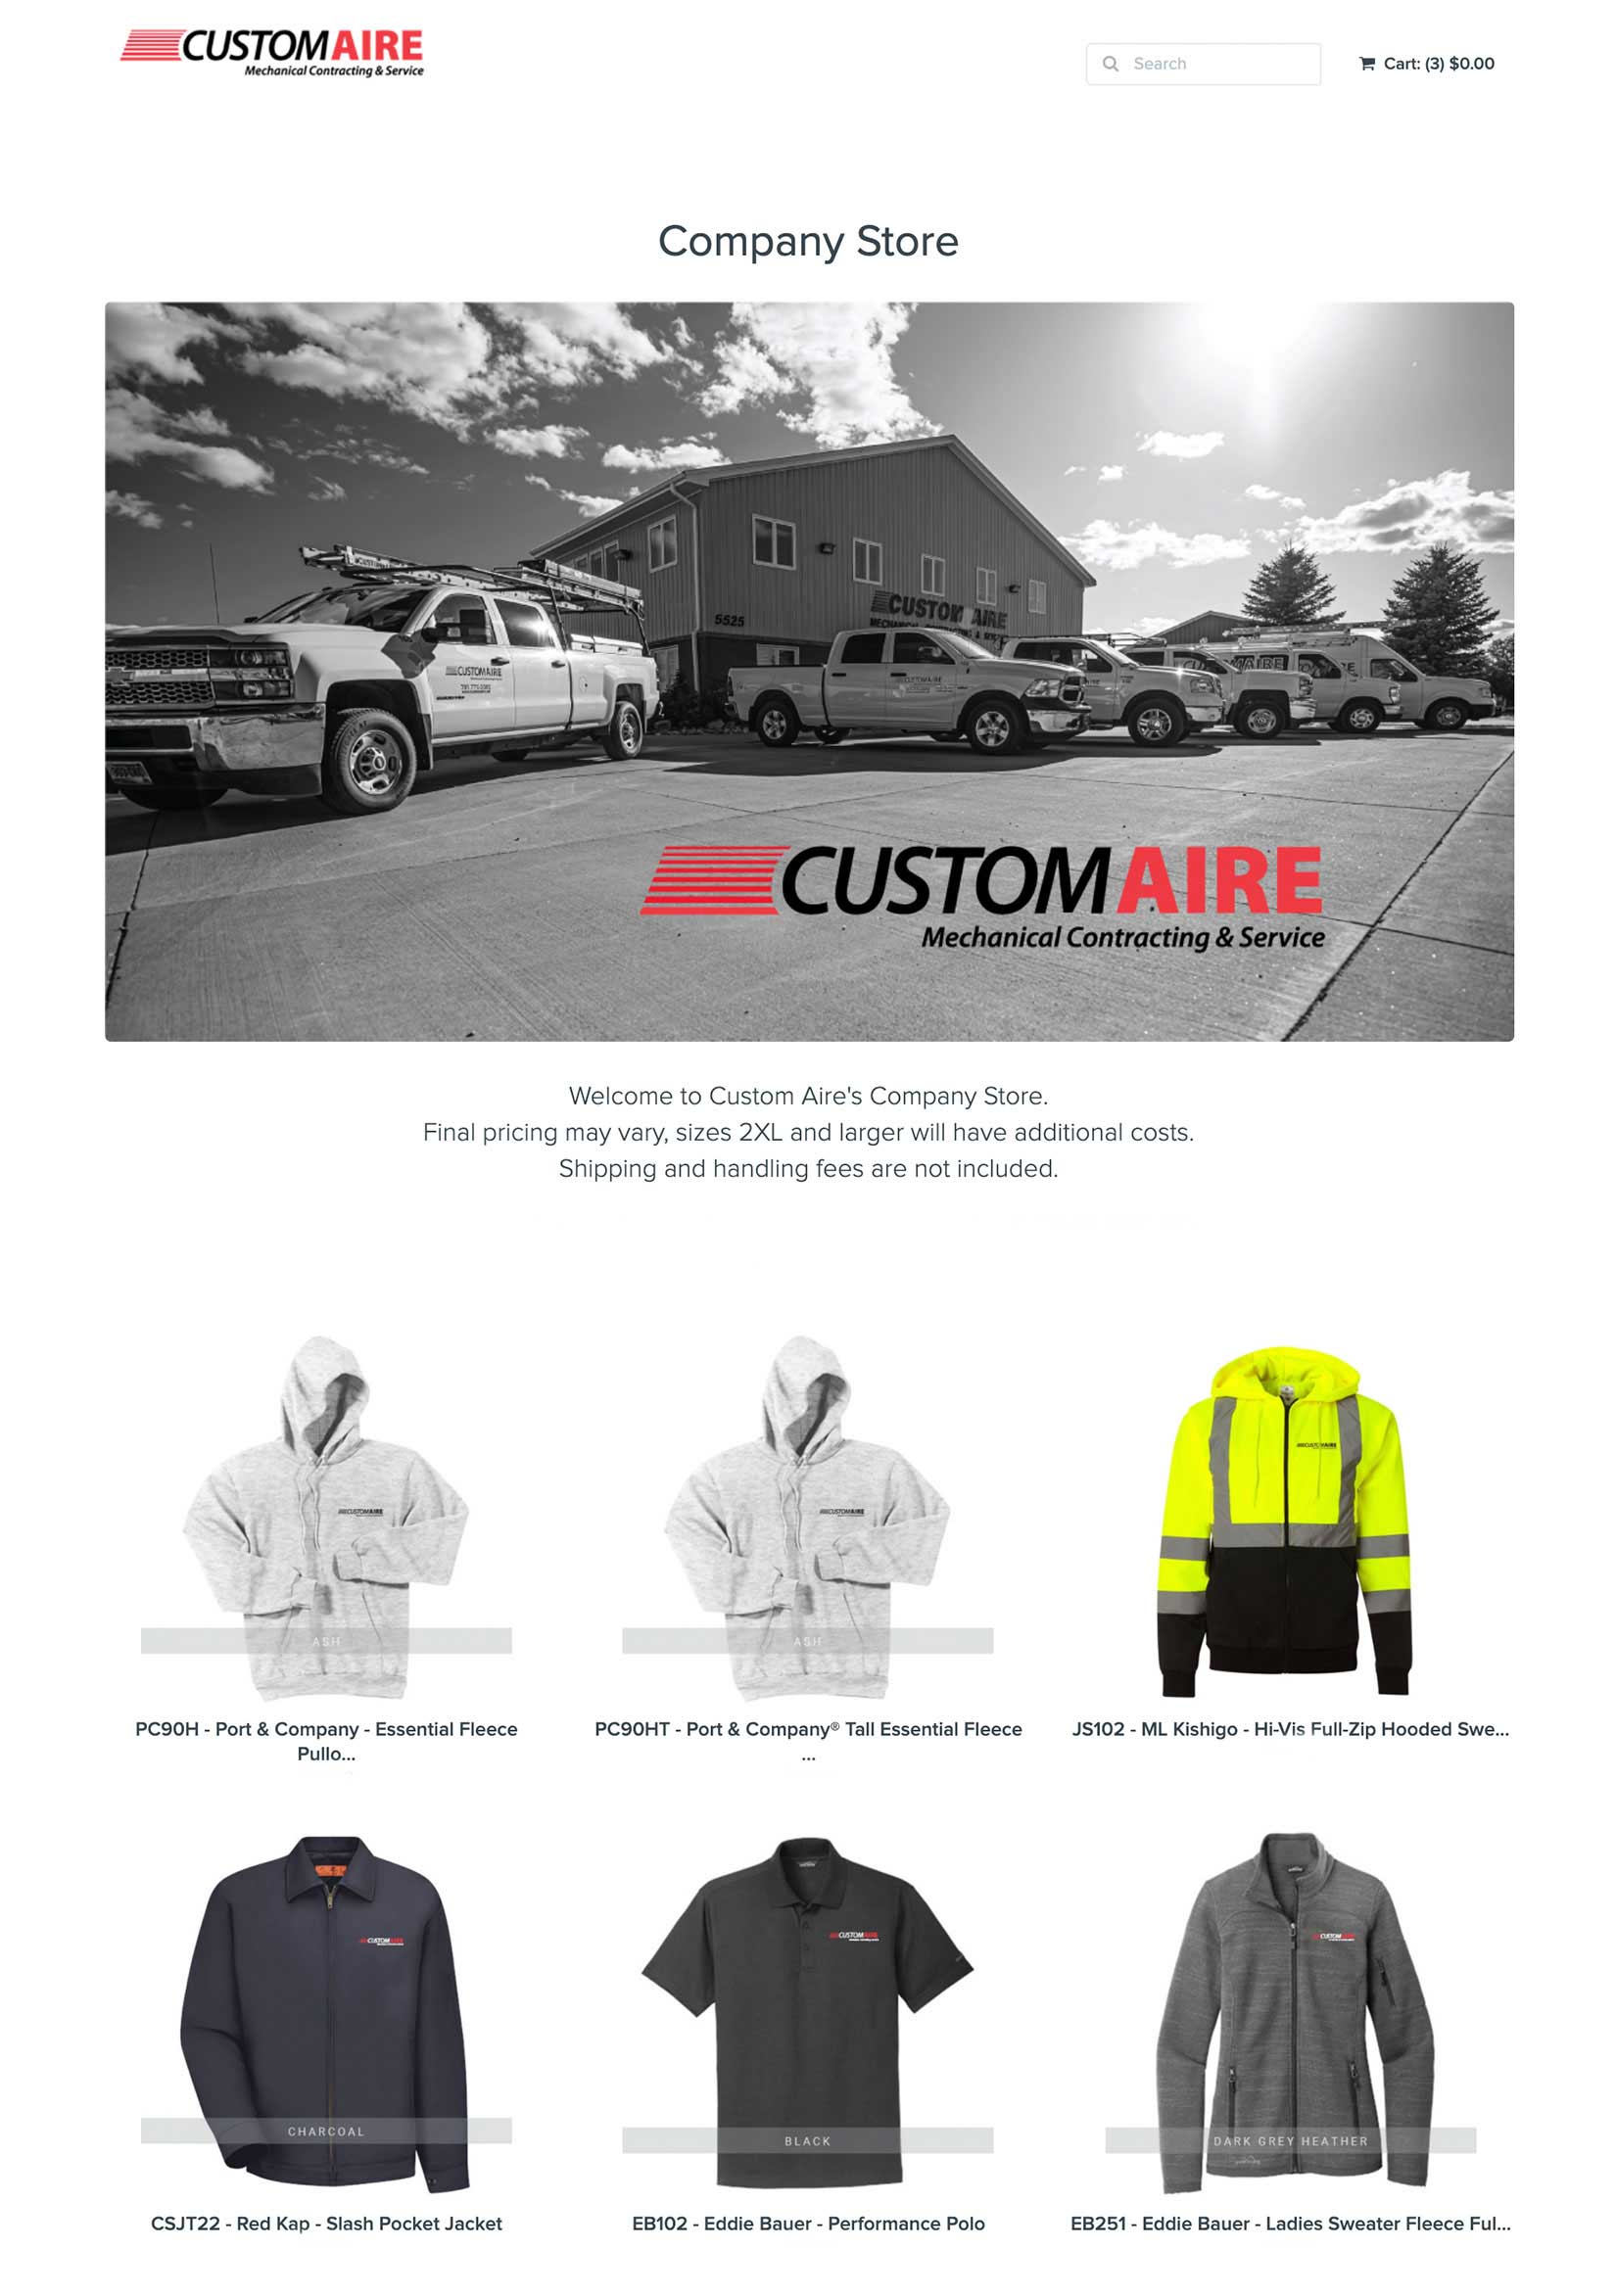 A screenshot of an online clothing store for Custom Aire